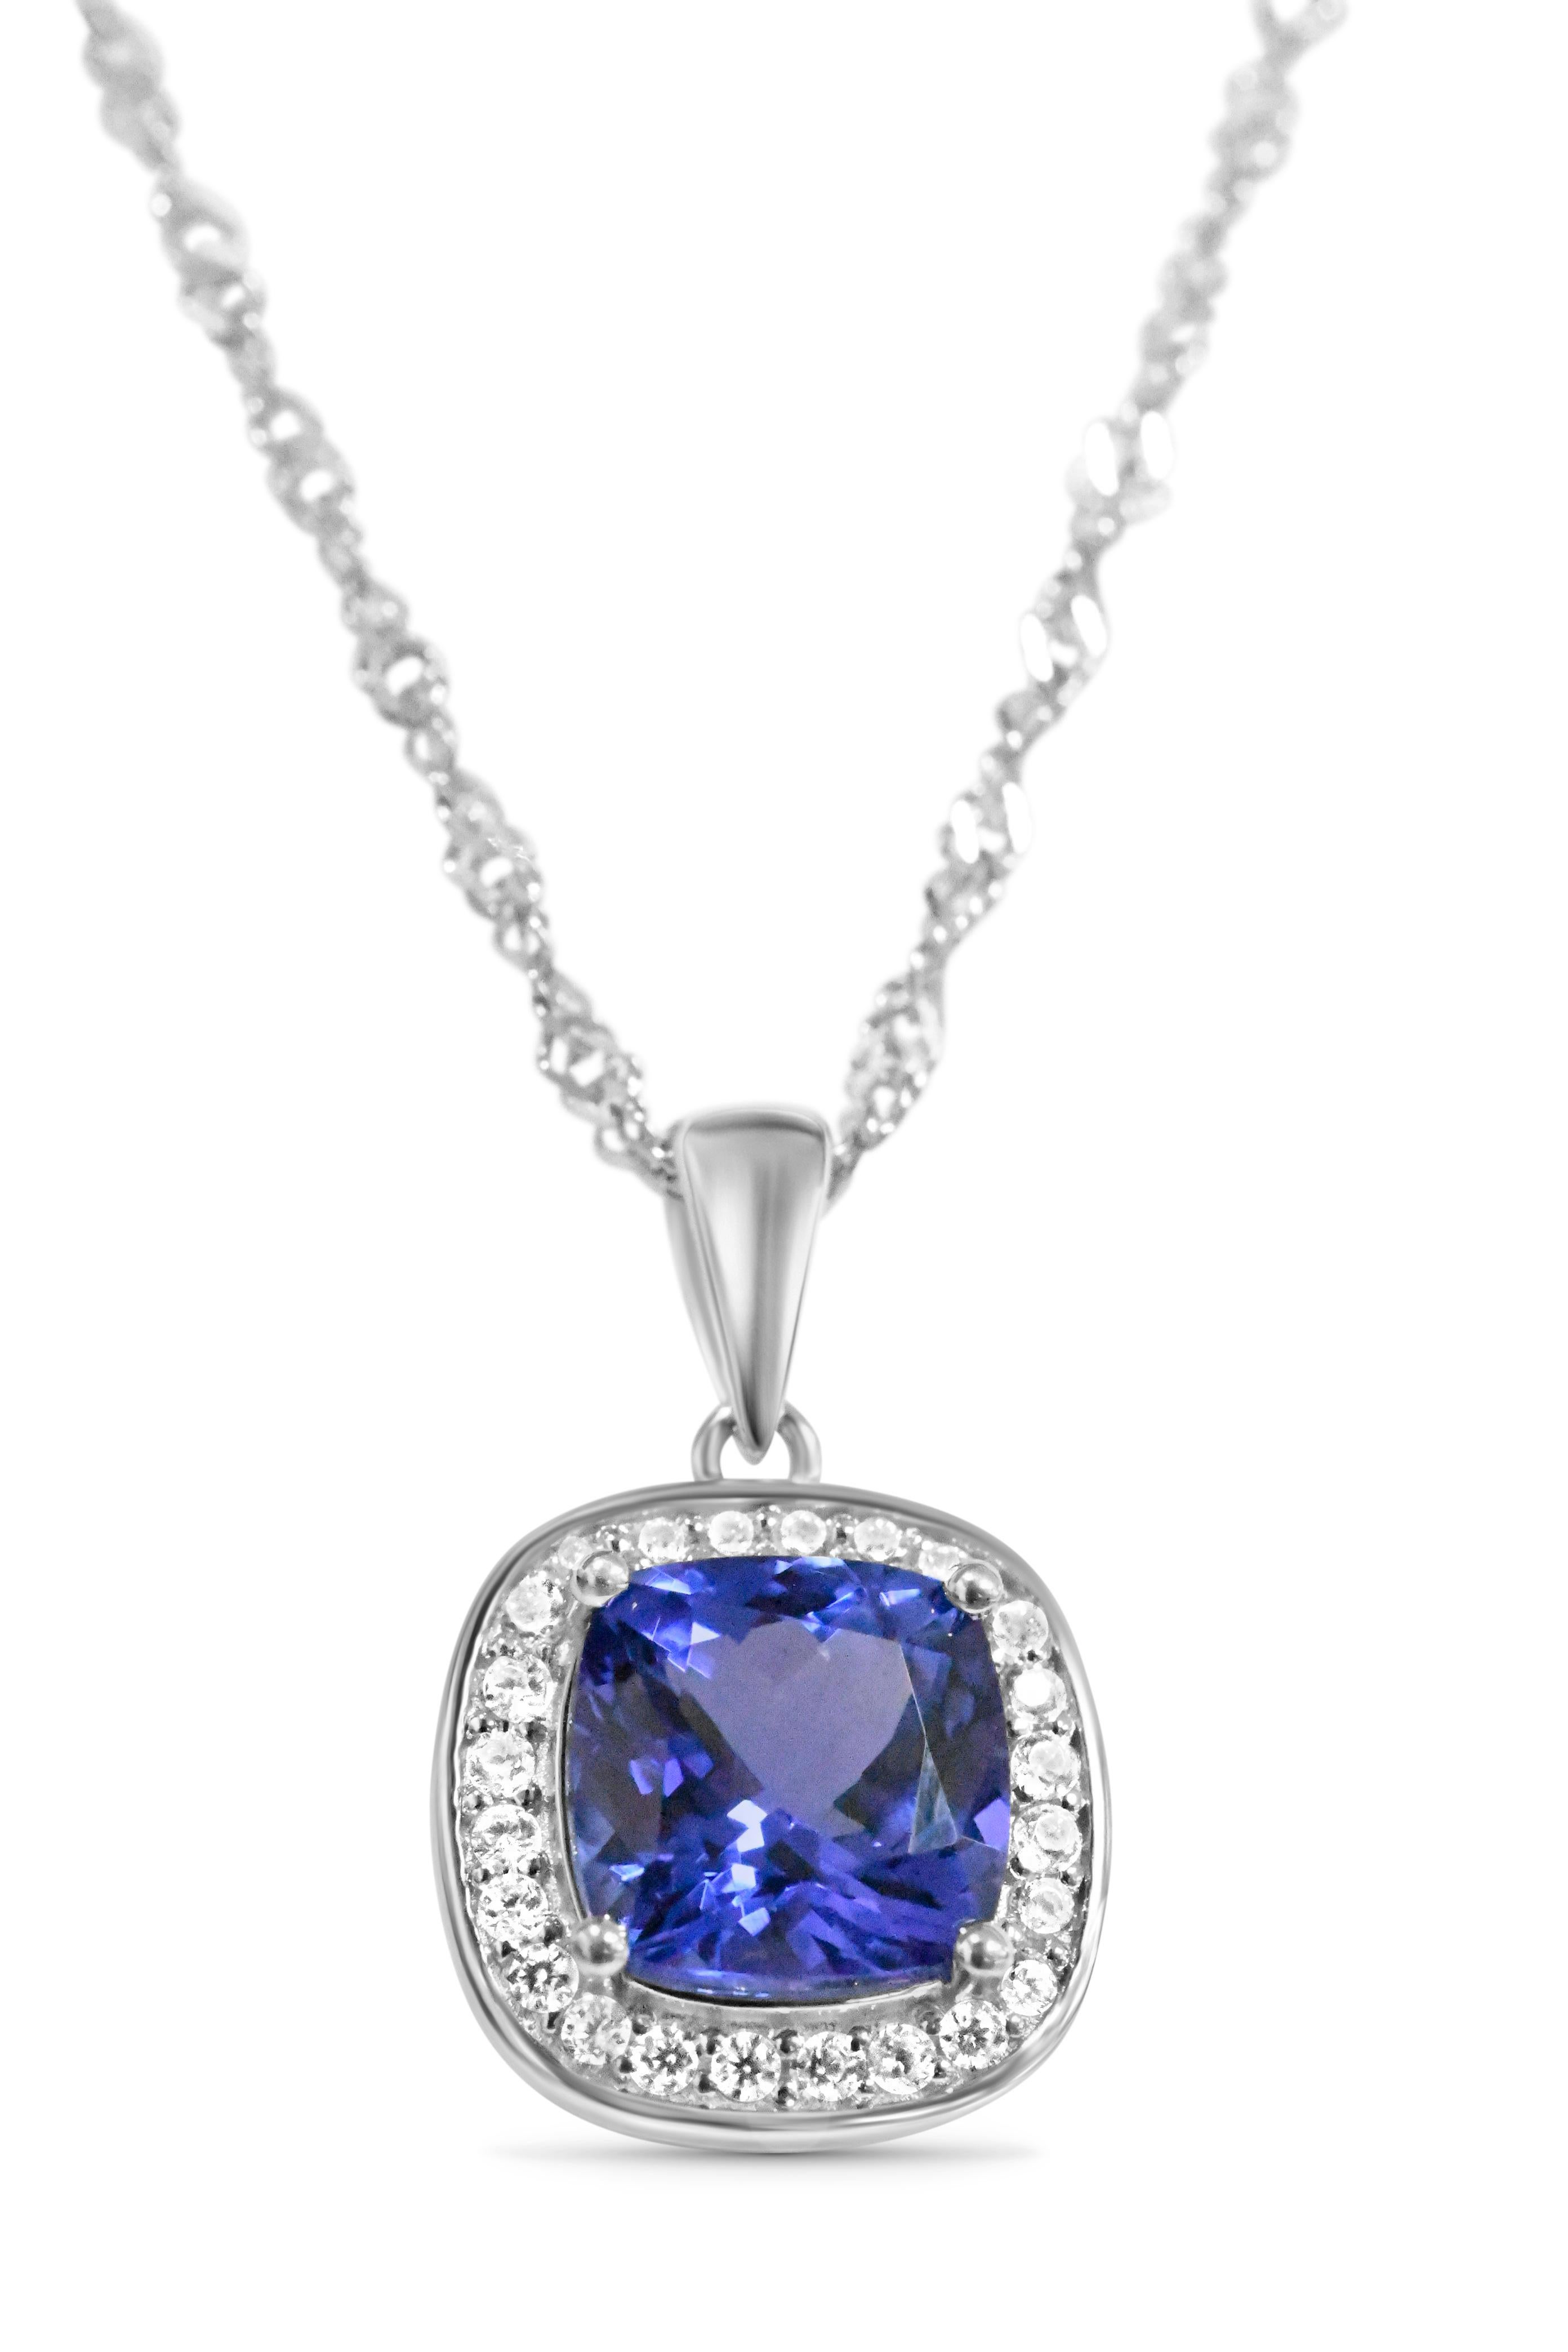 Tanzanite 925 Rhodium  Metal Platted Women's Pendant 2.41cts
Primary Stone : Tanzanite
Stone Shape: 8 x 8mm Cushion
Stone Weight : 2.41cts
Metal Weight :1.42g

Secondary Stone: White CZ
No of Stone: 24 pieces